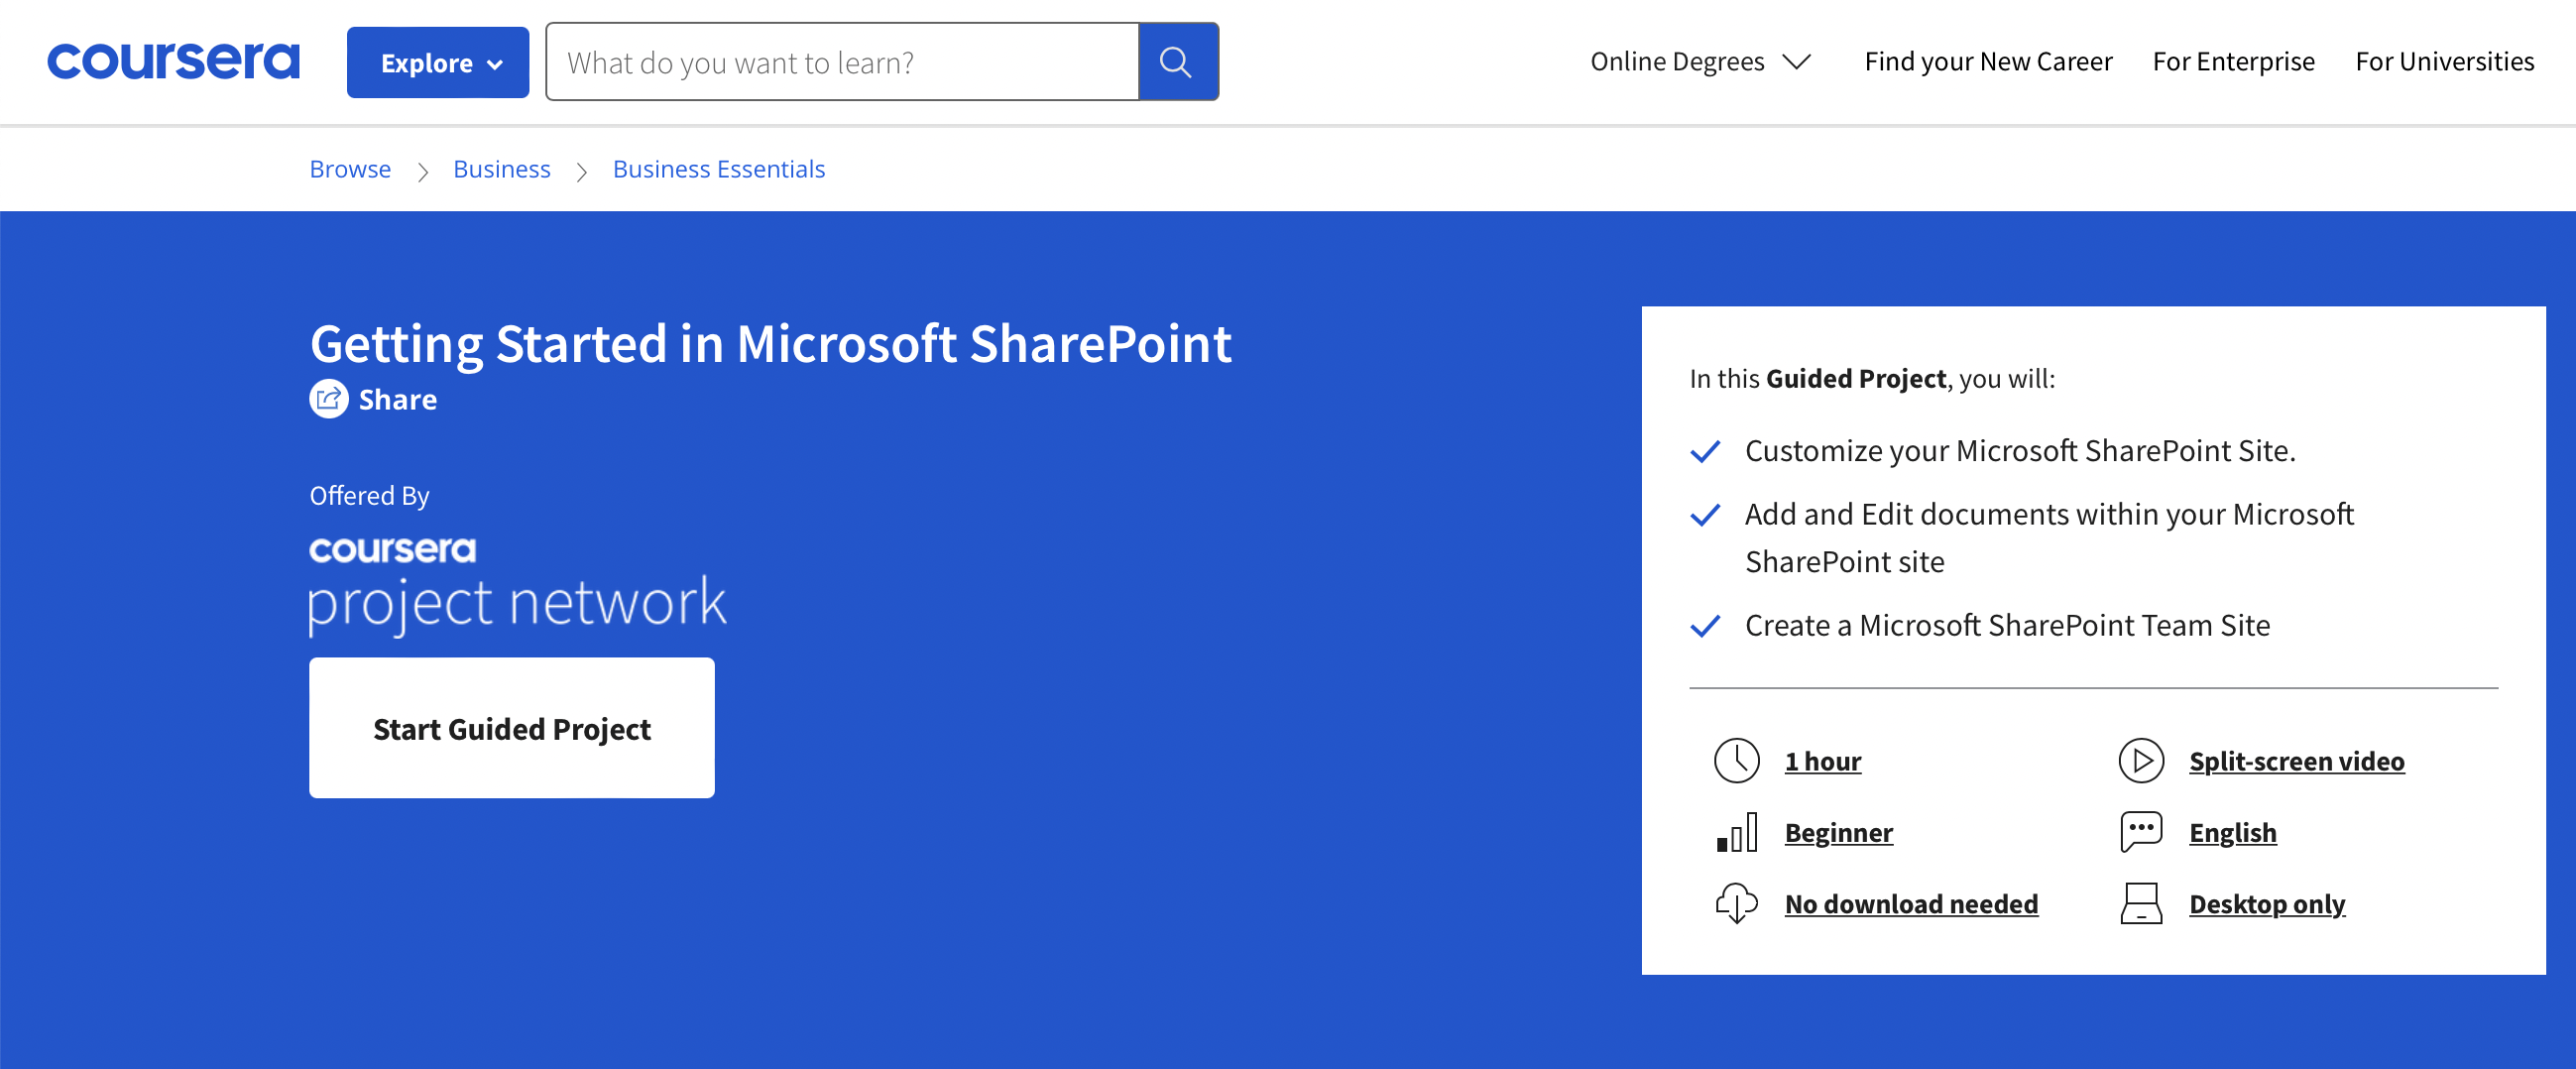 Getting Started in Microsoft SharePoint